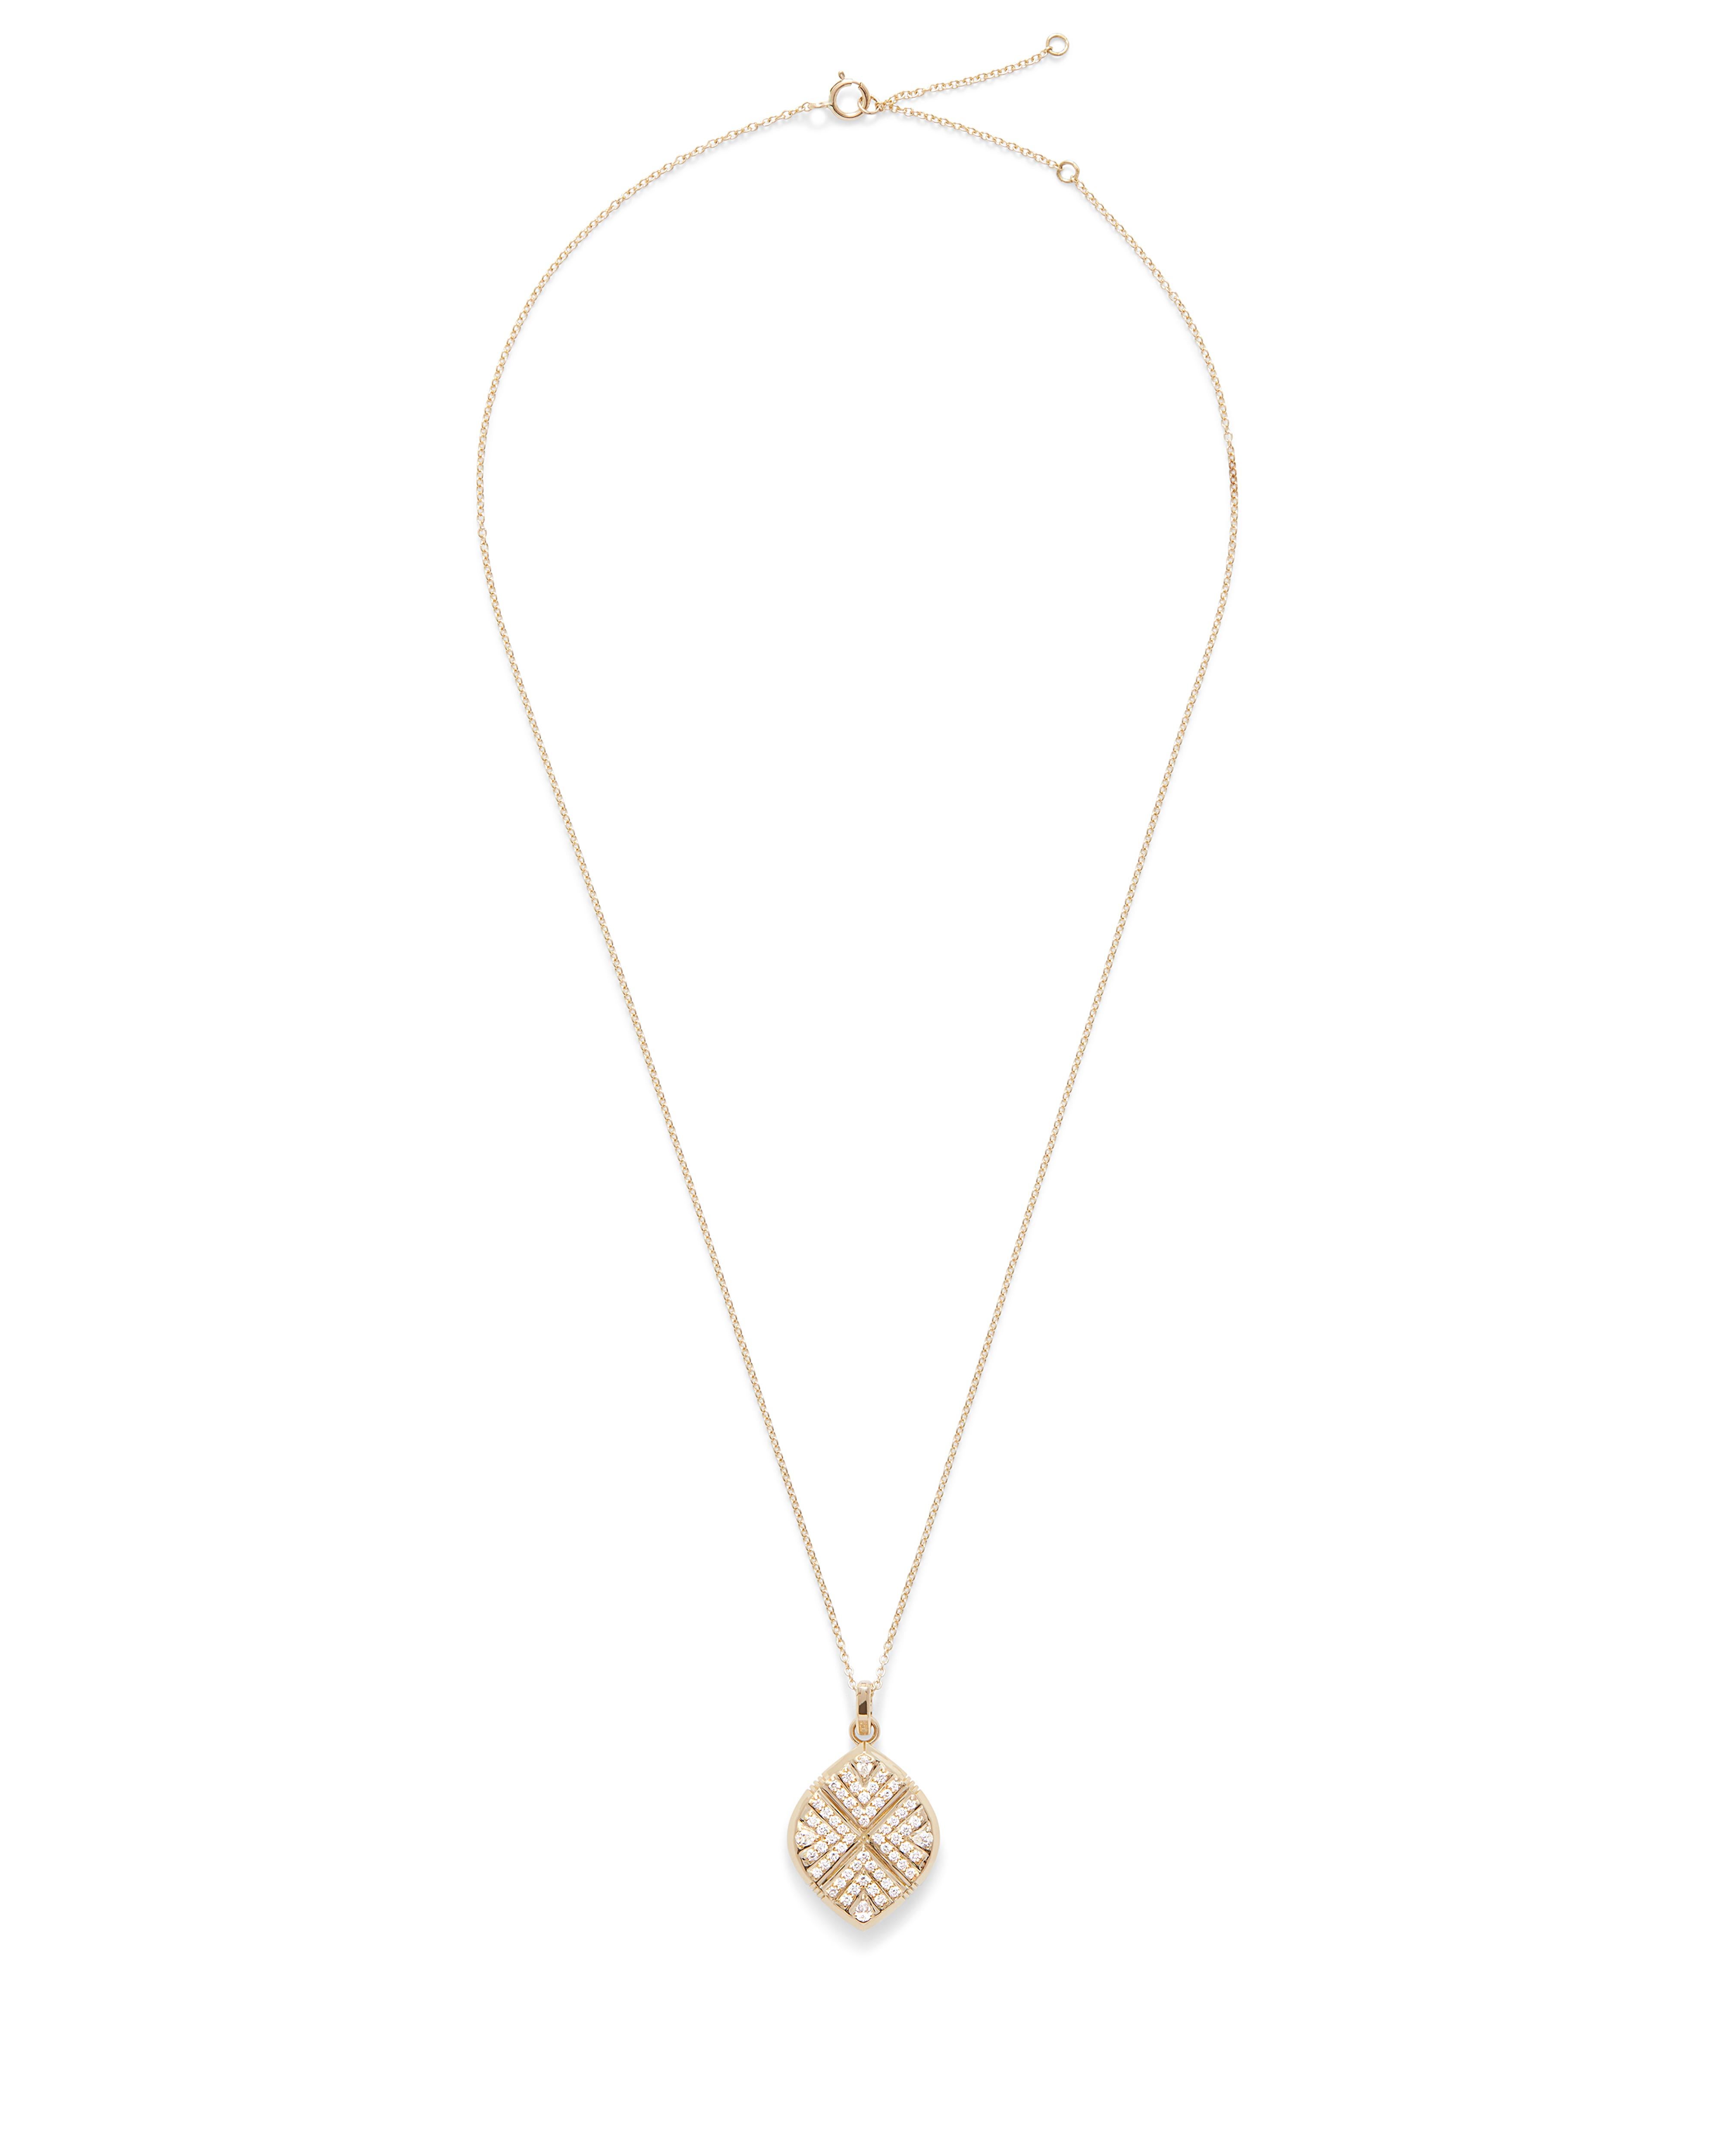 This natural diamond and 18K yellow gold shield necklace was inspired by the spindle patterns found in traditional Mudcloth tapestries.  The pendant has a bail that allow for the pendant to be worn on a different chain of your choice or a strand of